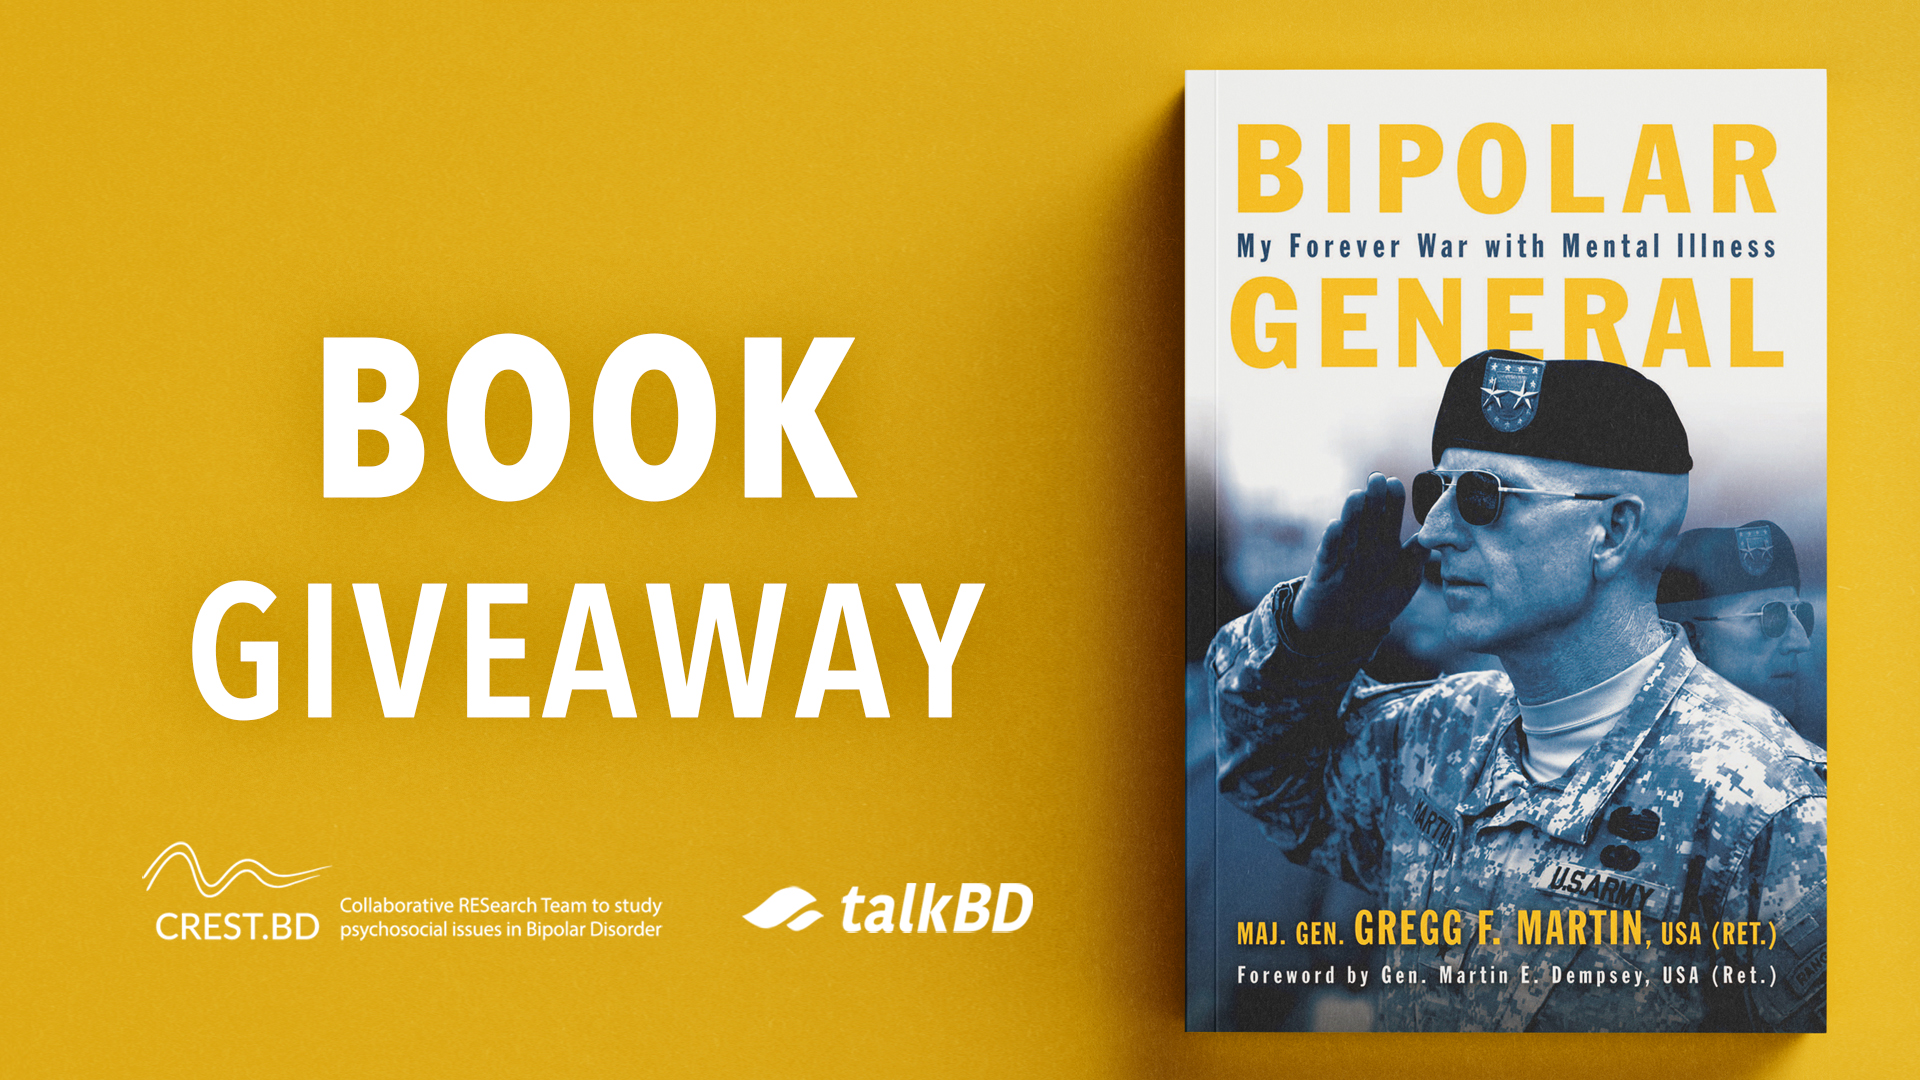 Book Giveaway: “Bipolar General” by Gregg Martin!